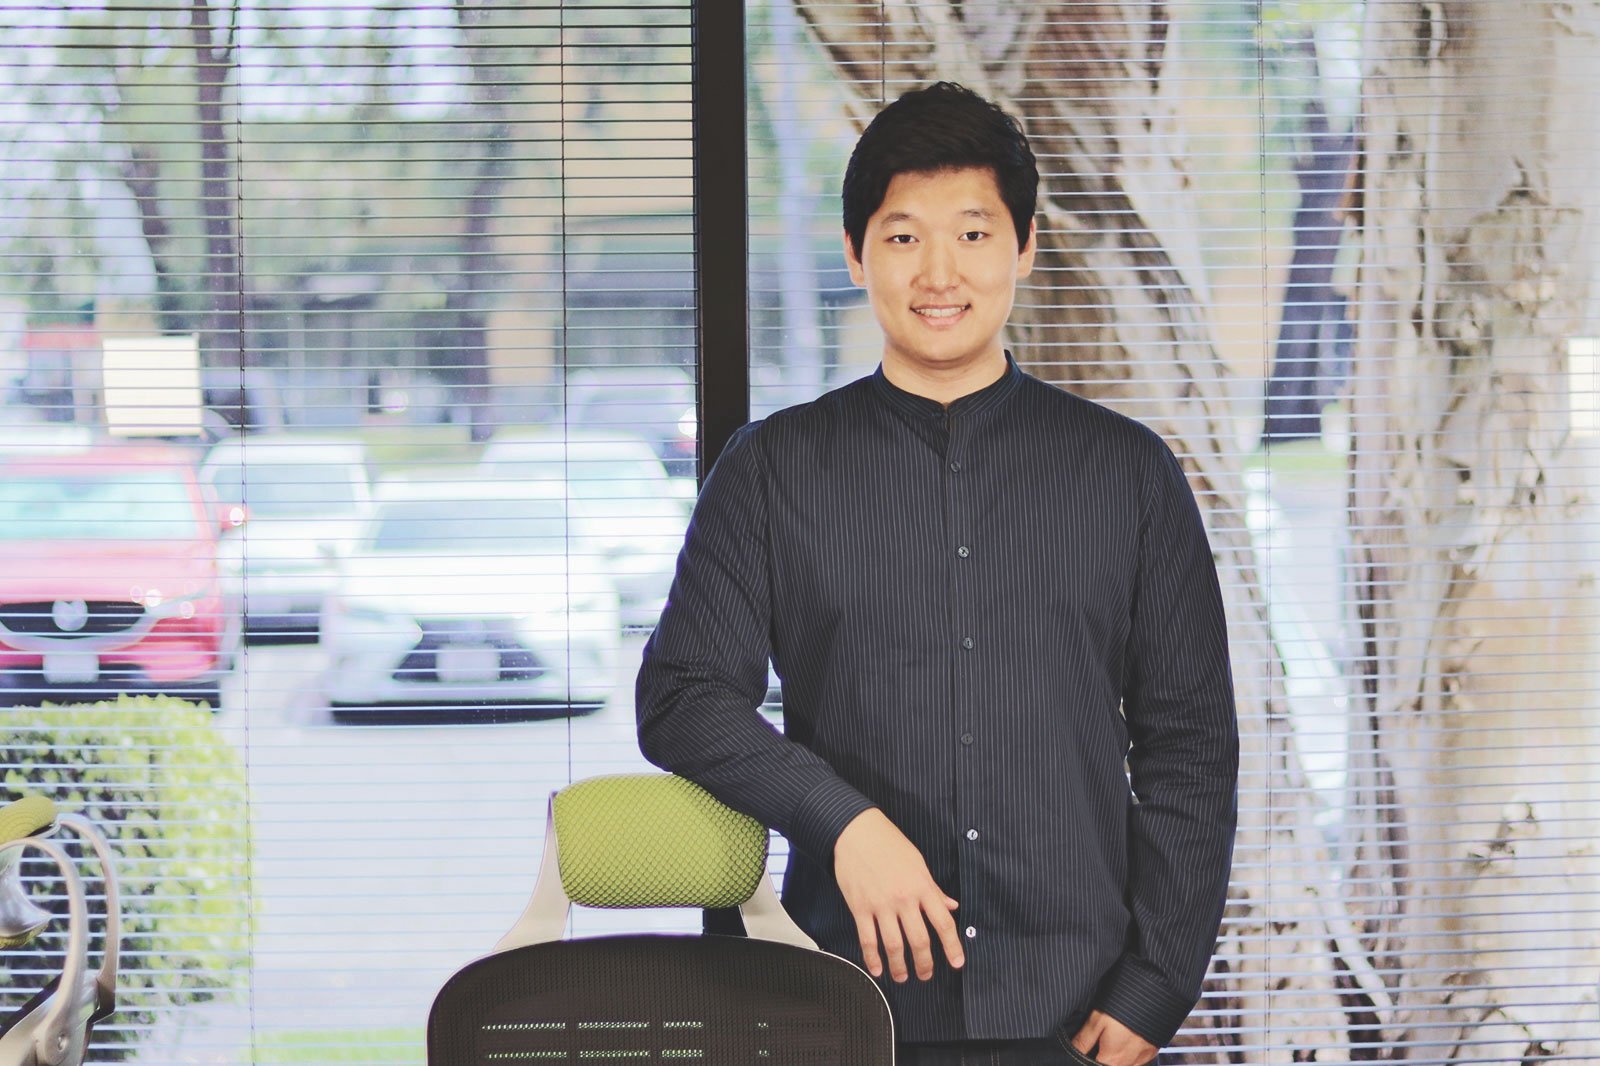 Issac Hwang, a 24-Year-Old Entrepreneur, is the New Face of Finance